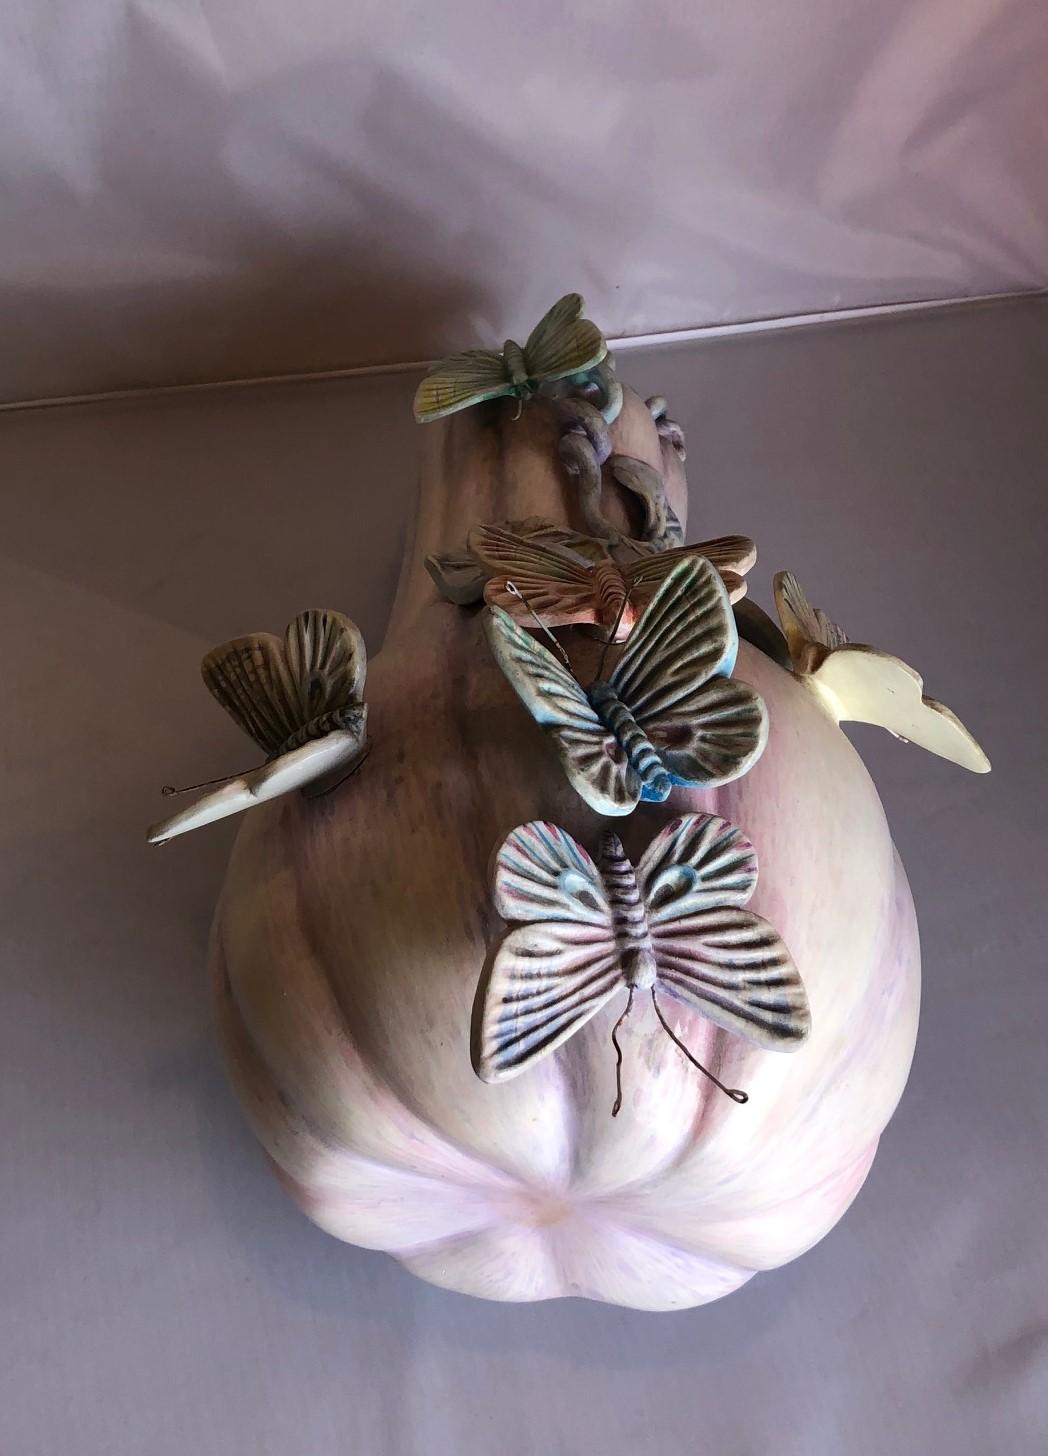 20th Century Whimsical Ceramic Butterflies on Squash Sculpture by Sergio Bustamante